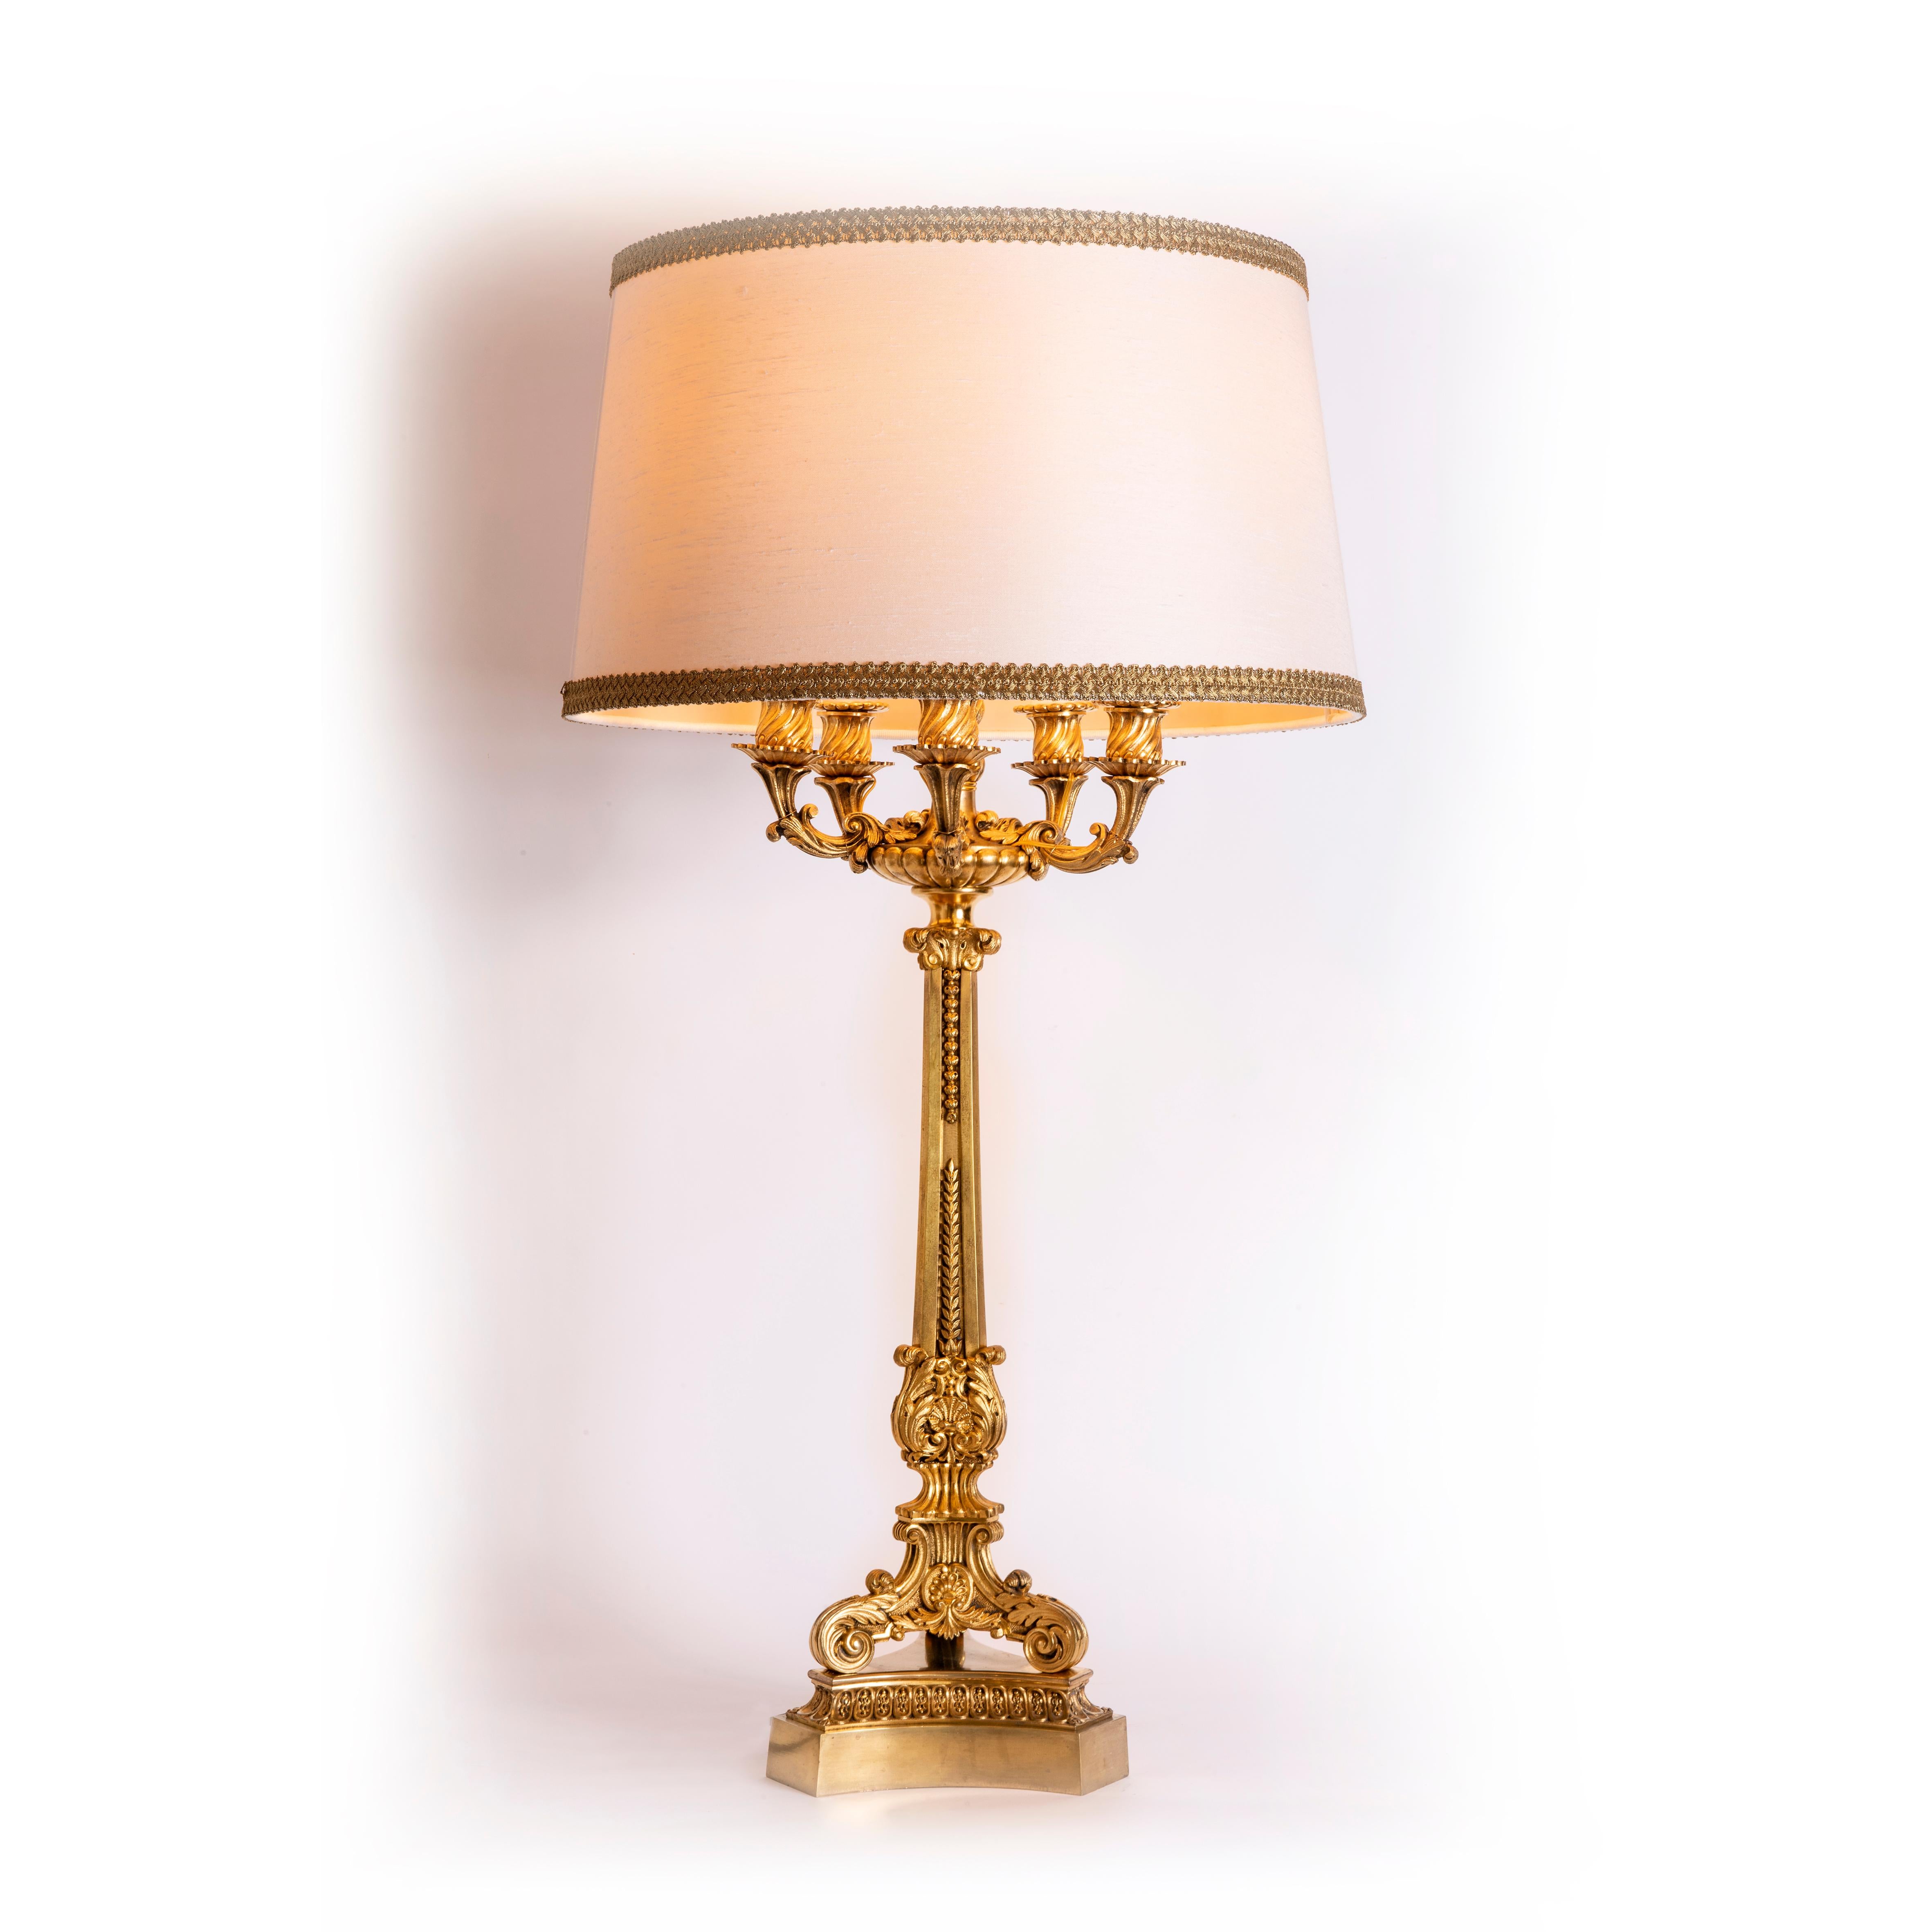 A great quality mid 20th century cast gilt bronze table lamp with finely chased Neoclassical detailing. Tripod base supports a tapered shaft with decorative mounts, surmounted by a five armed candelabra top.
Of French origin, the provenance of this